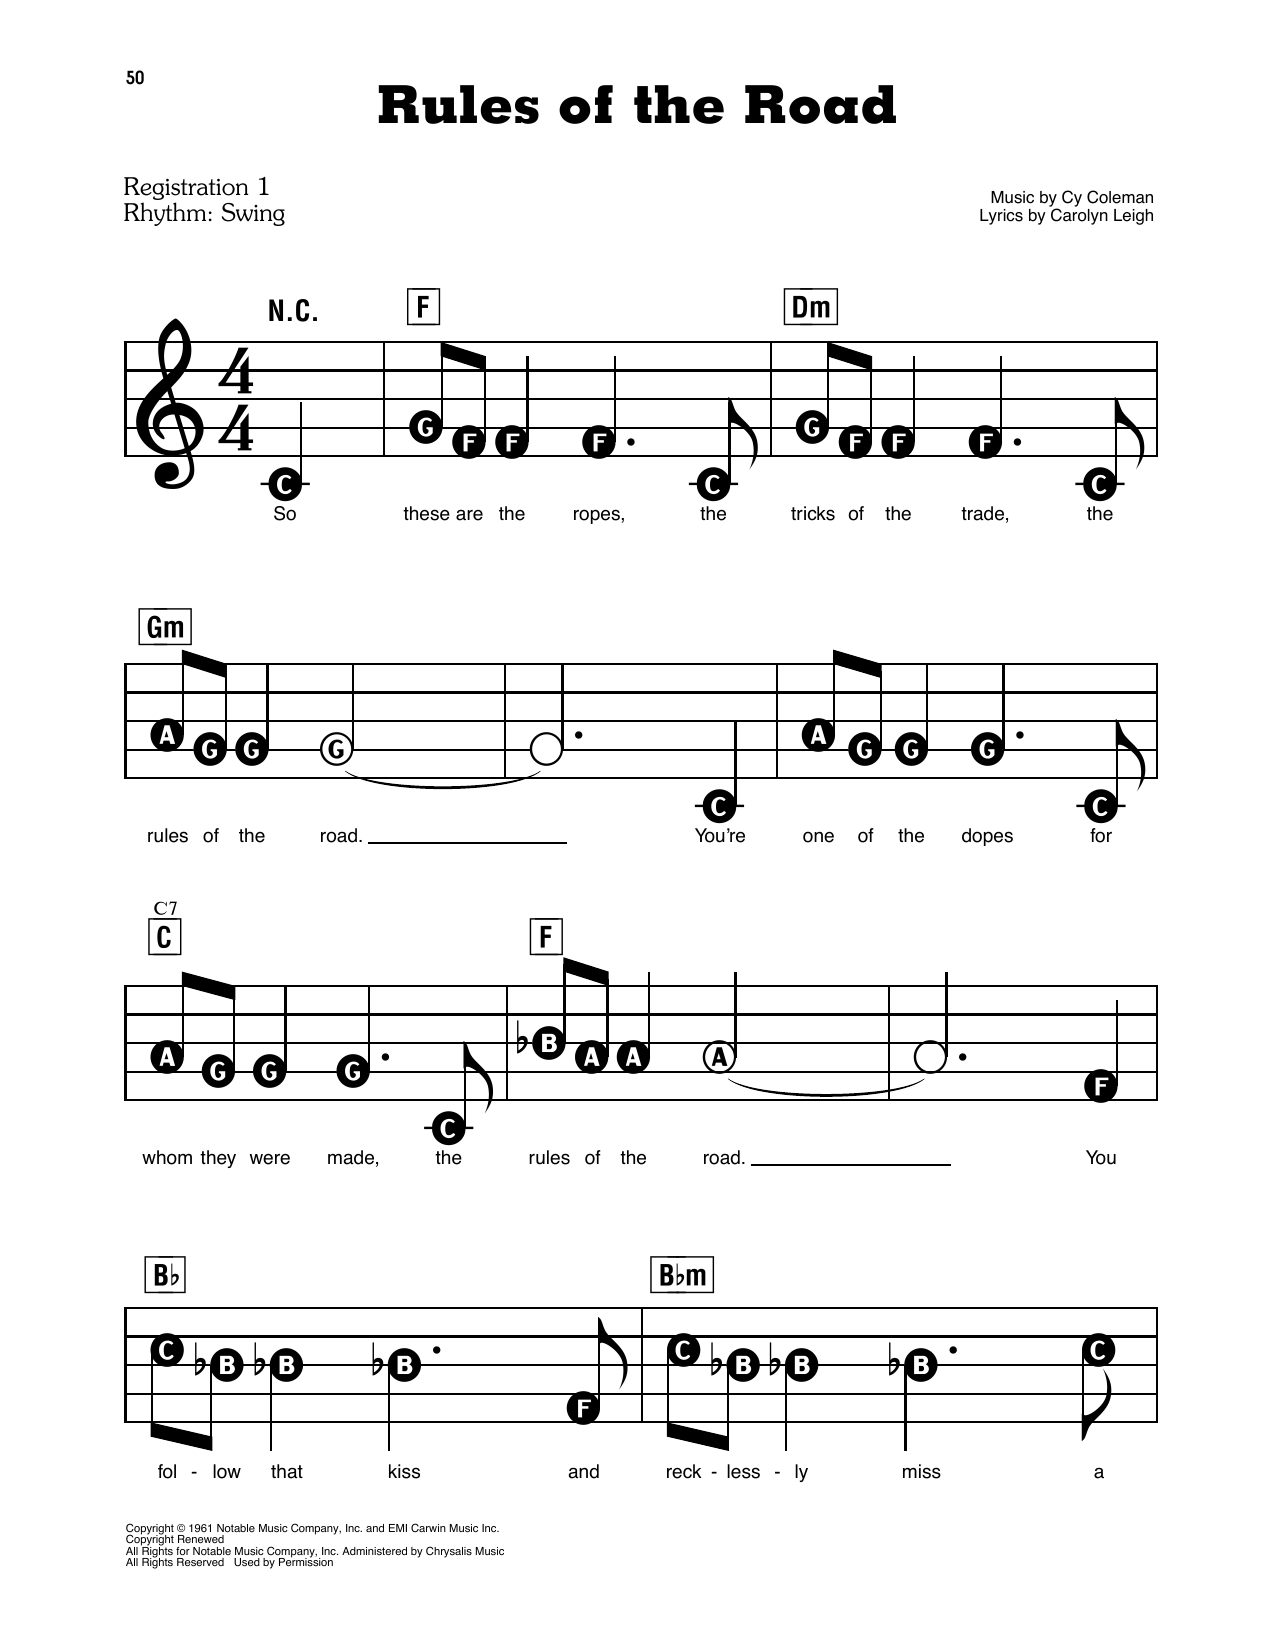 Cy Coleman Rules Of The Road sheet music notes and chords. Download Printable PDF.